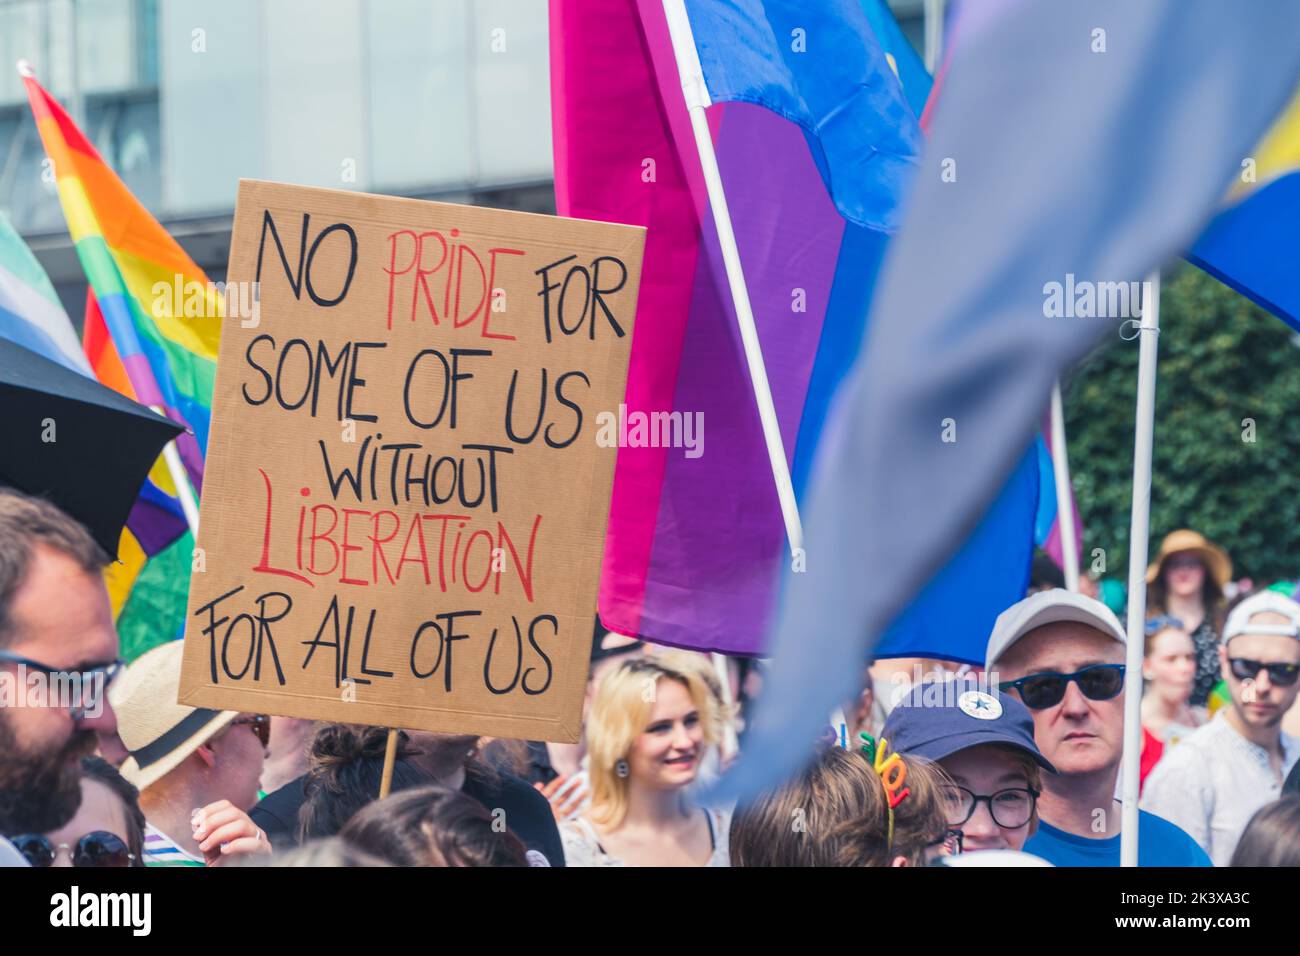 June 25, 2022 Warsaw, Poland - Diverse people marching with protest signs and colorful flags in support of lgbtq people. Equality march of the Warsaw Equality Parade 2022 and KyivPride. High quality photo Stock Photo